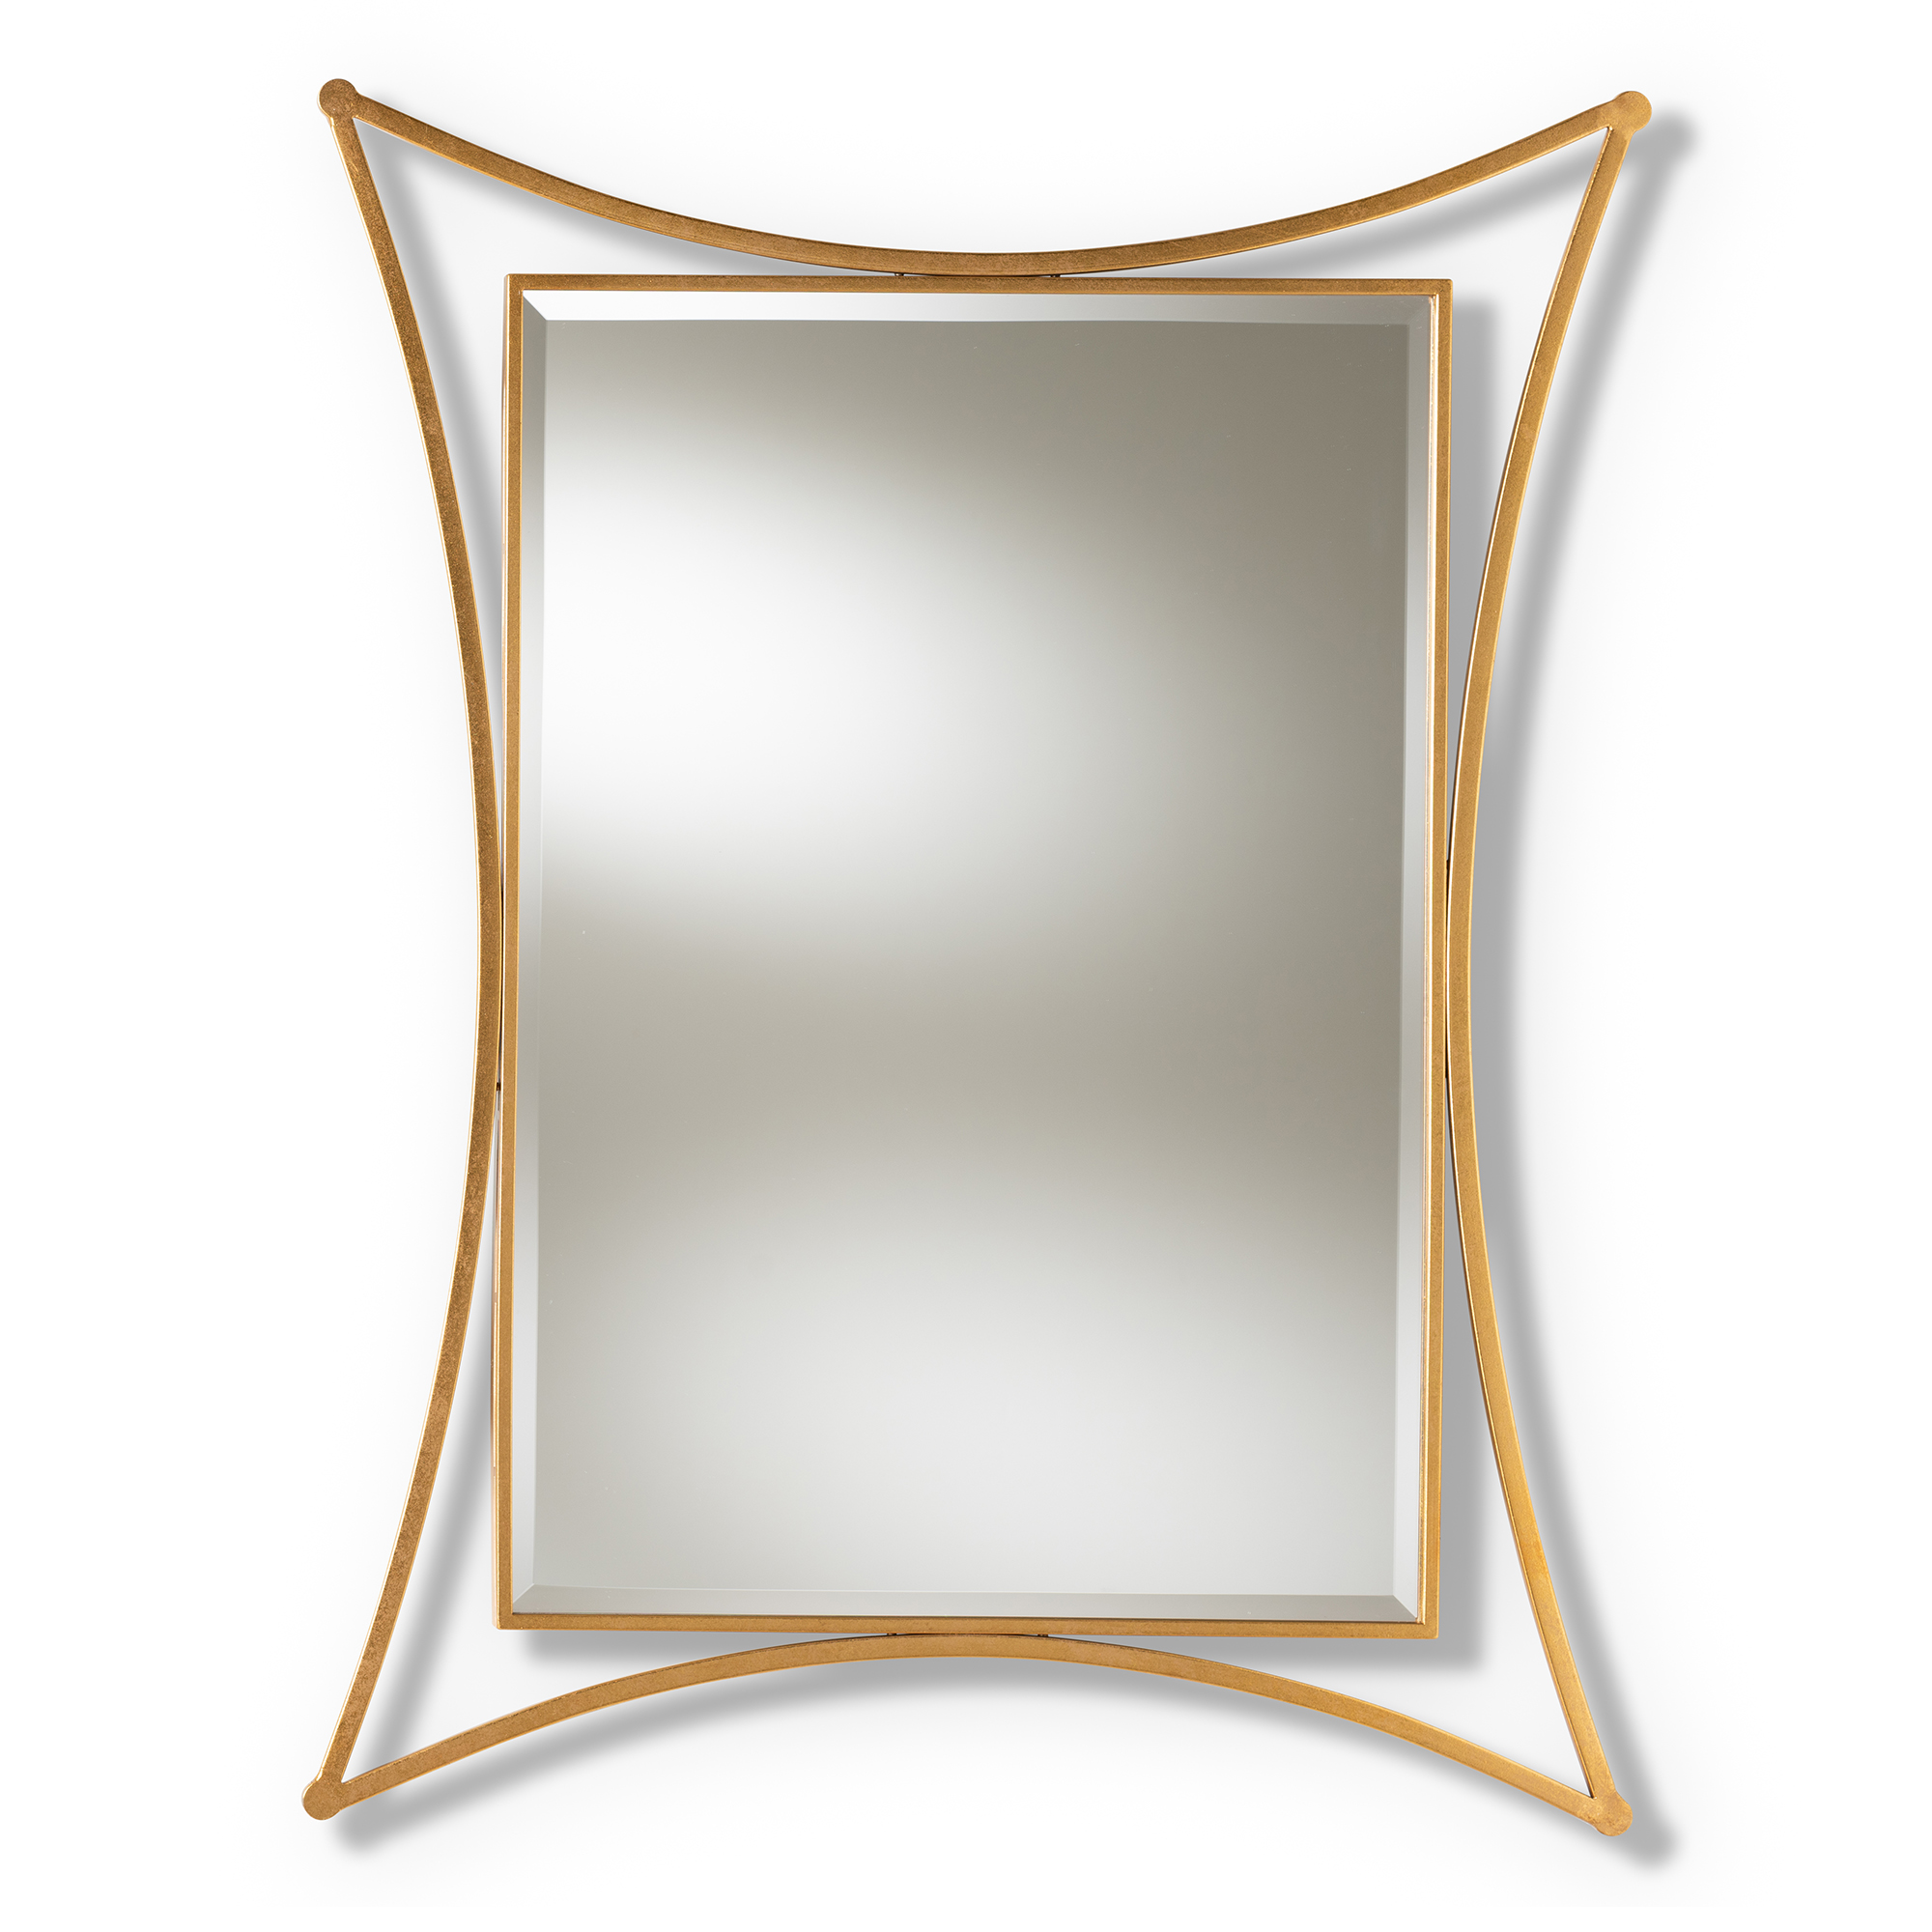 Baxton Studio Melia Modern and Contemporary Antique Gold Finished Rectangular Accent Wall Mirror